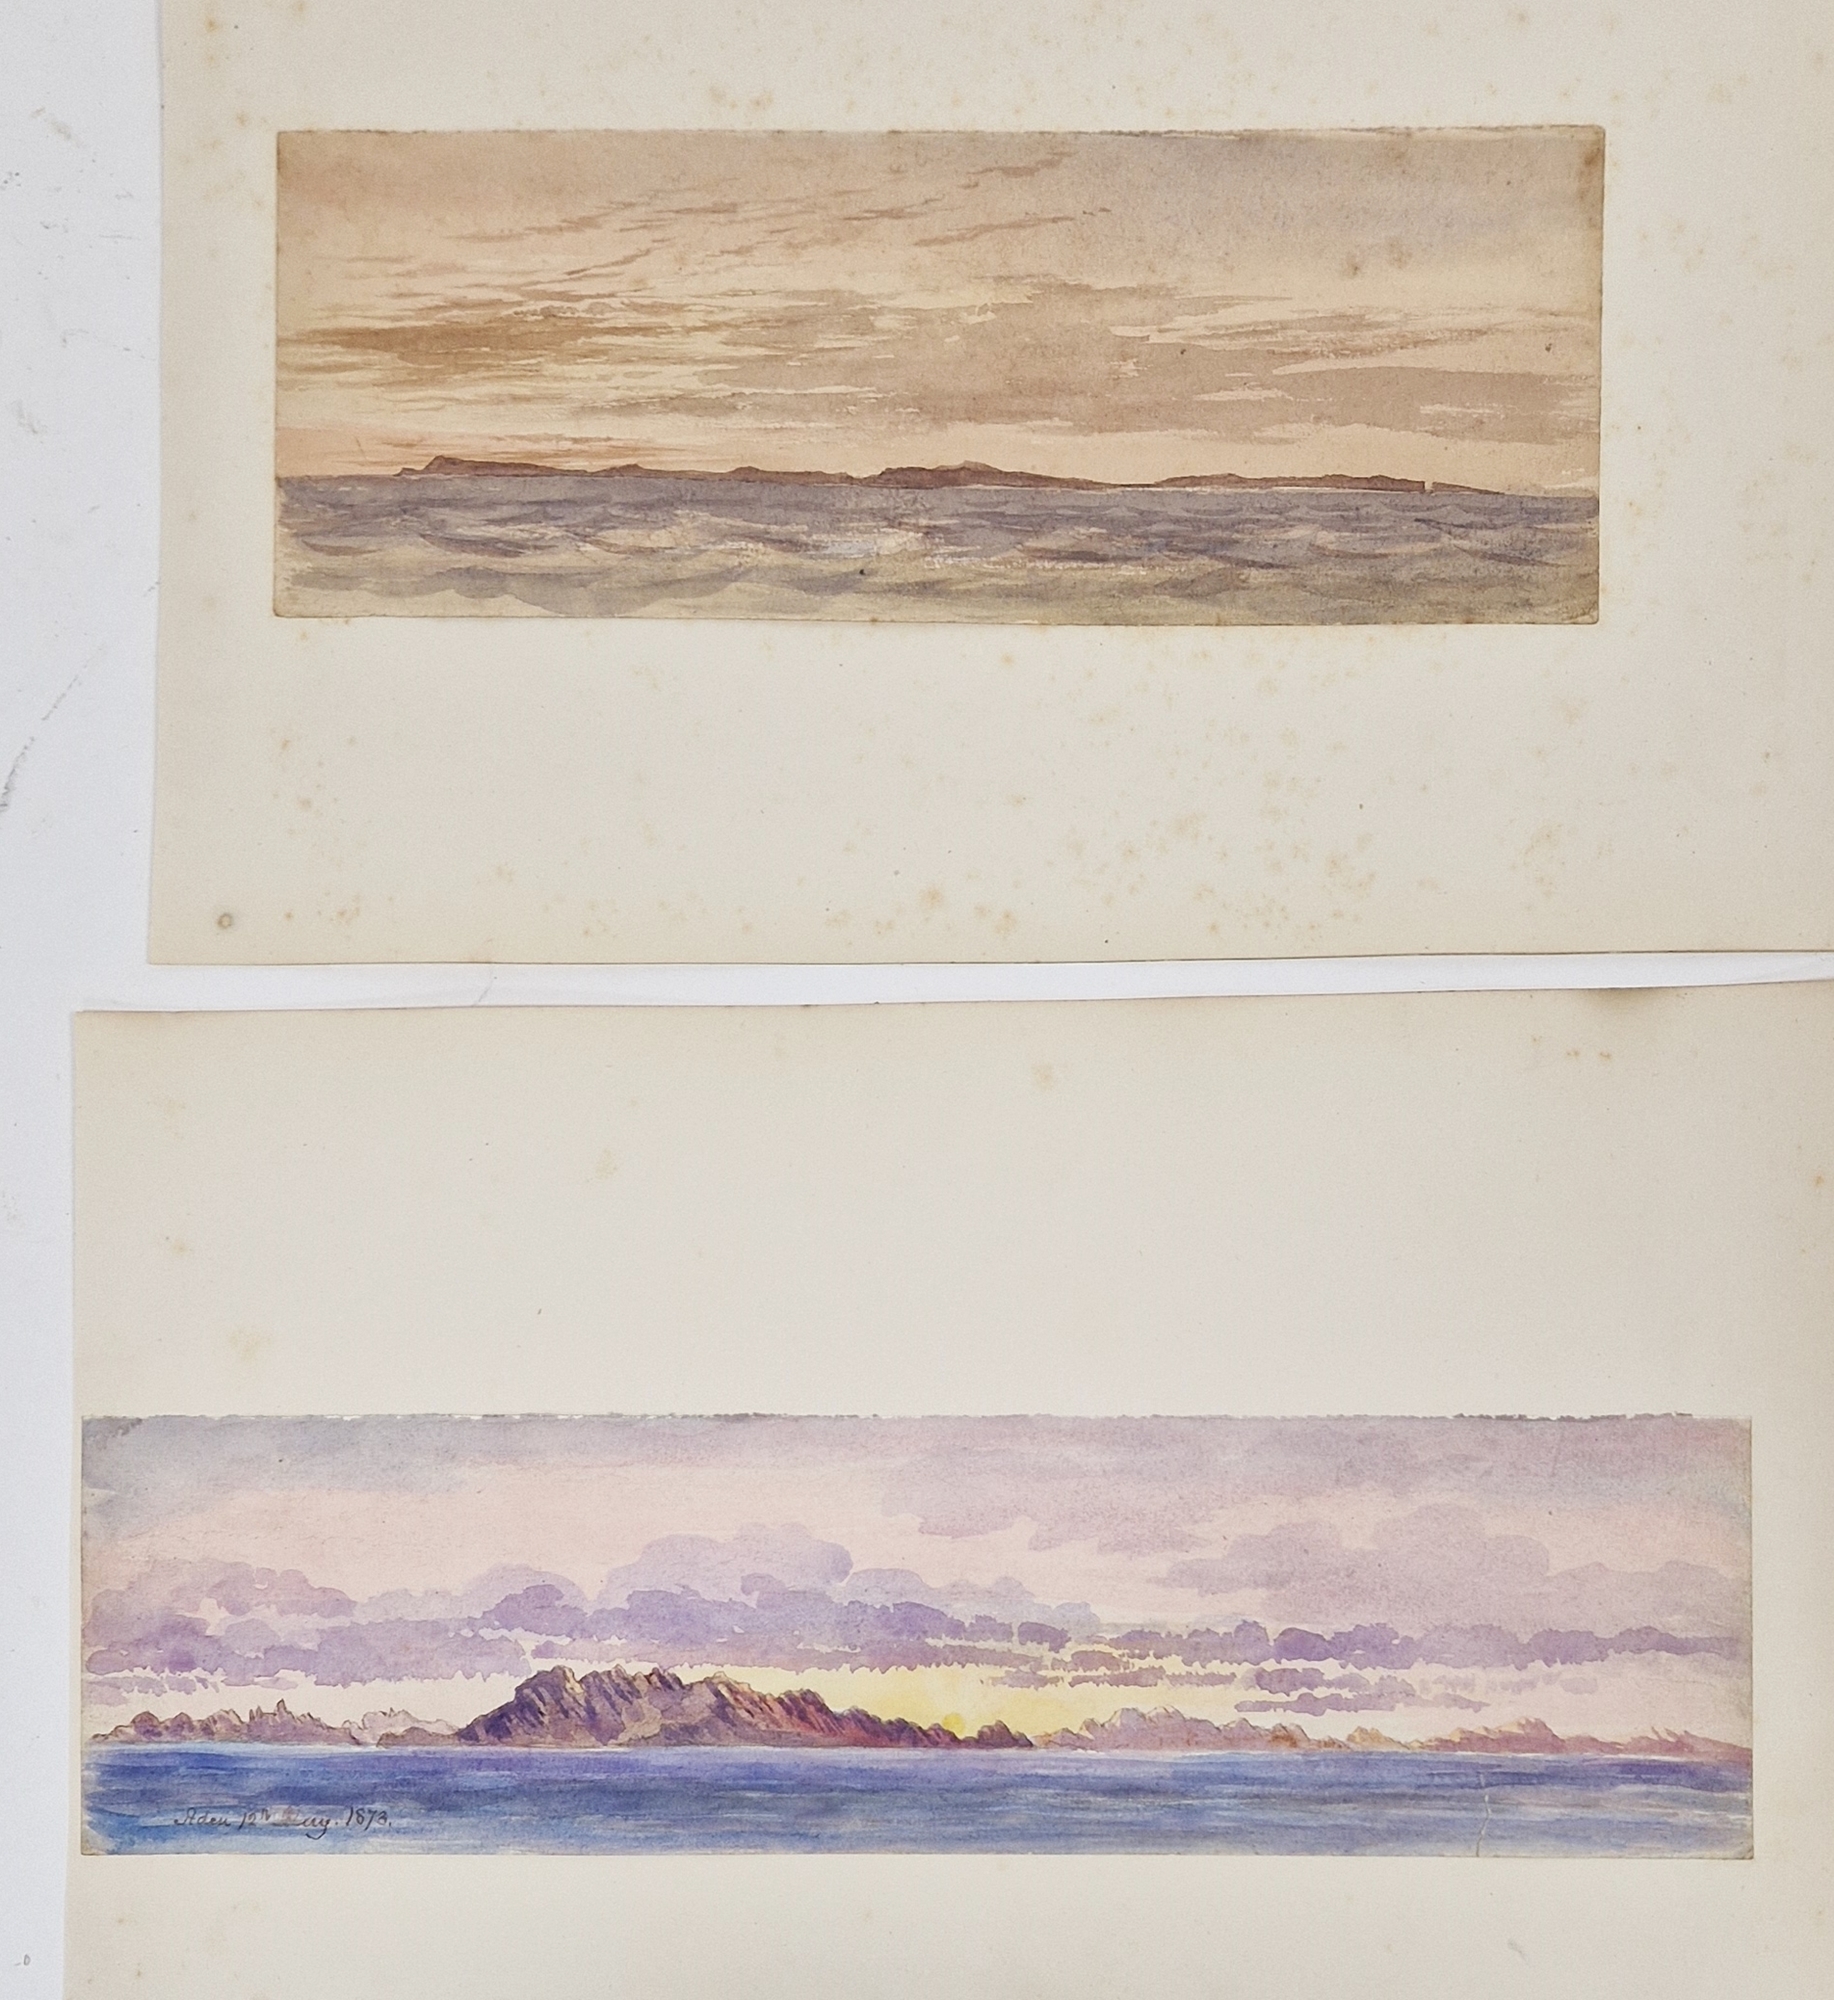 Watercolour drawings - collection Attrib. A H. Walter " A Passage from India to England 1873" - Image 7 of 13